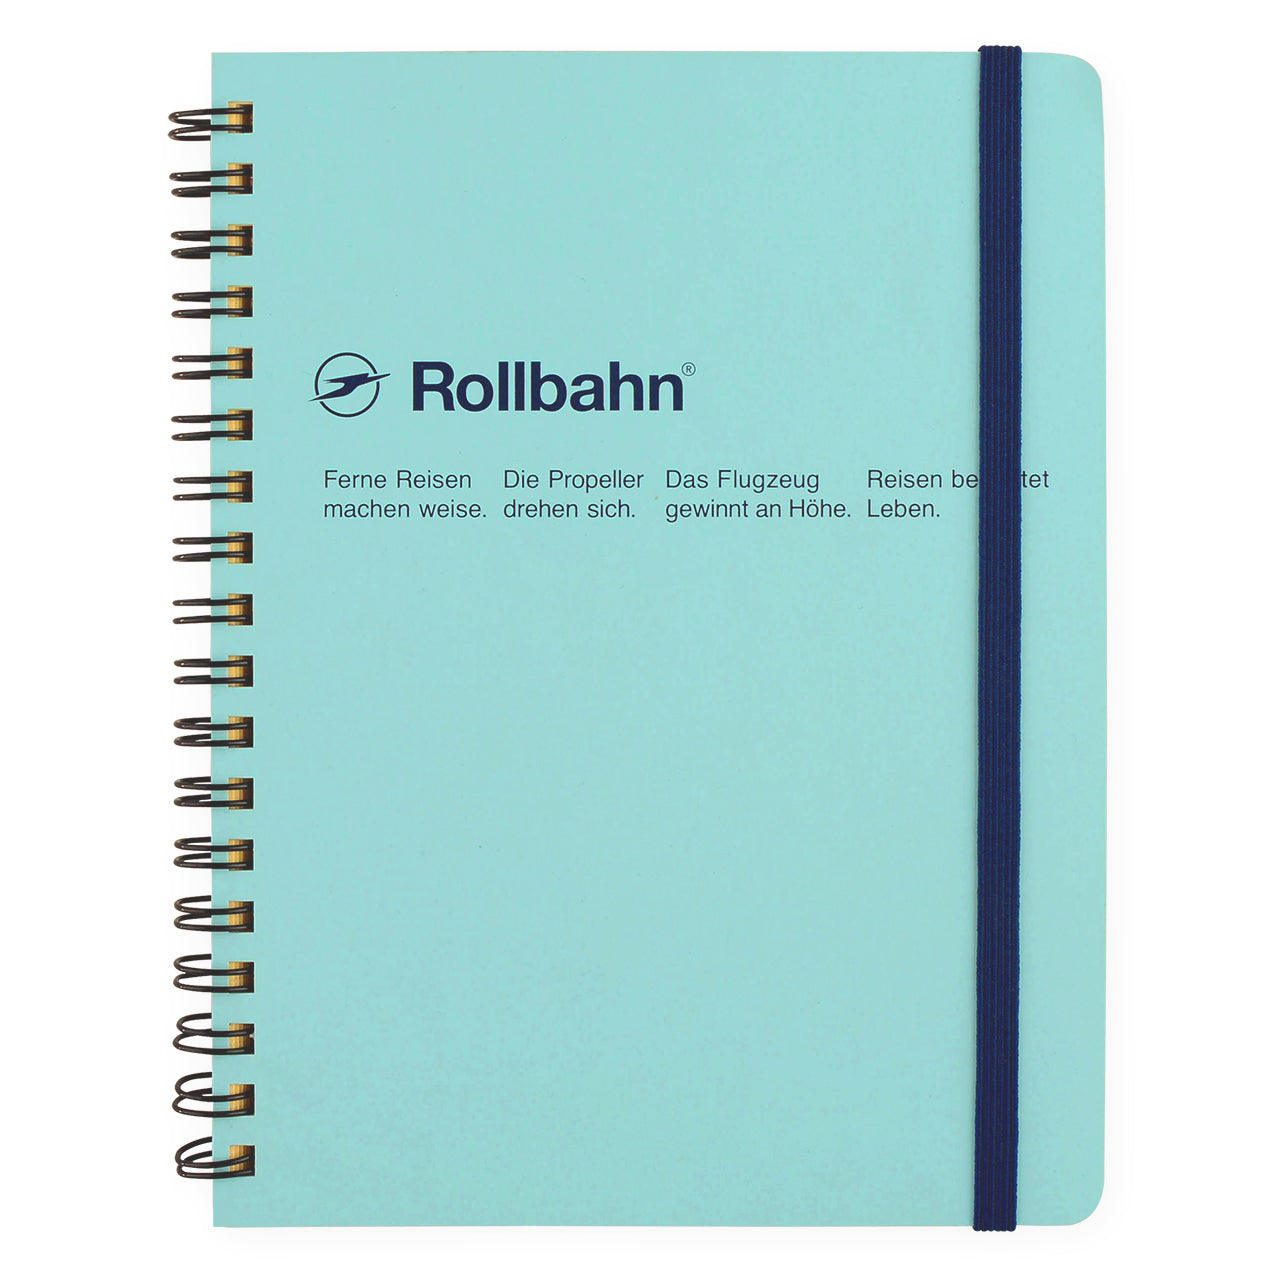 Delfonics Rollbahn Notebook Small, Large Or A5 | 9 Colors Sky Blue / Small (4.5 x 5.5")